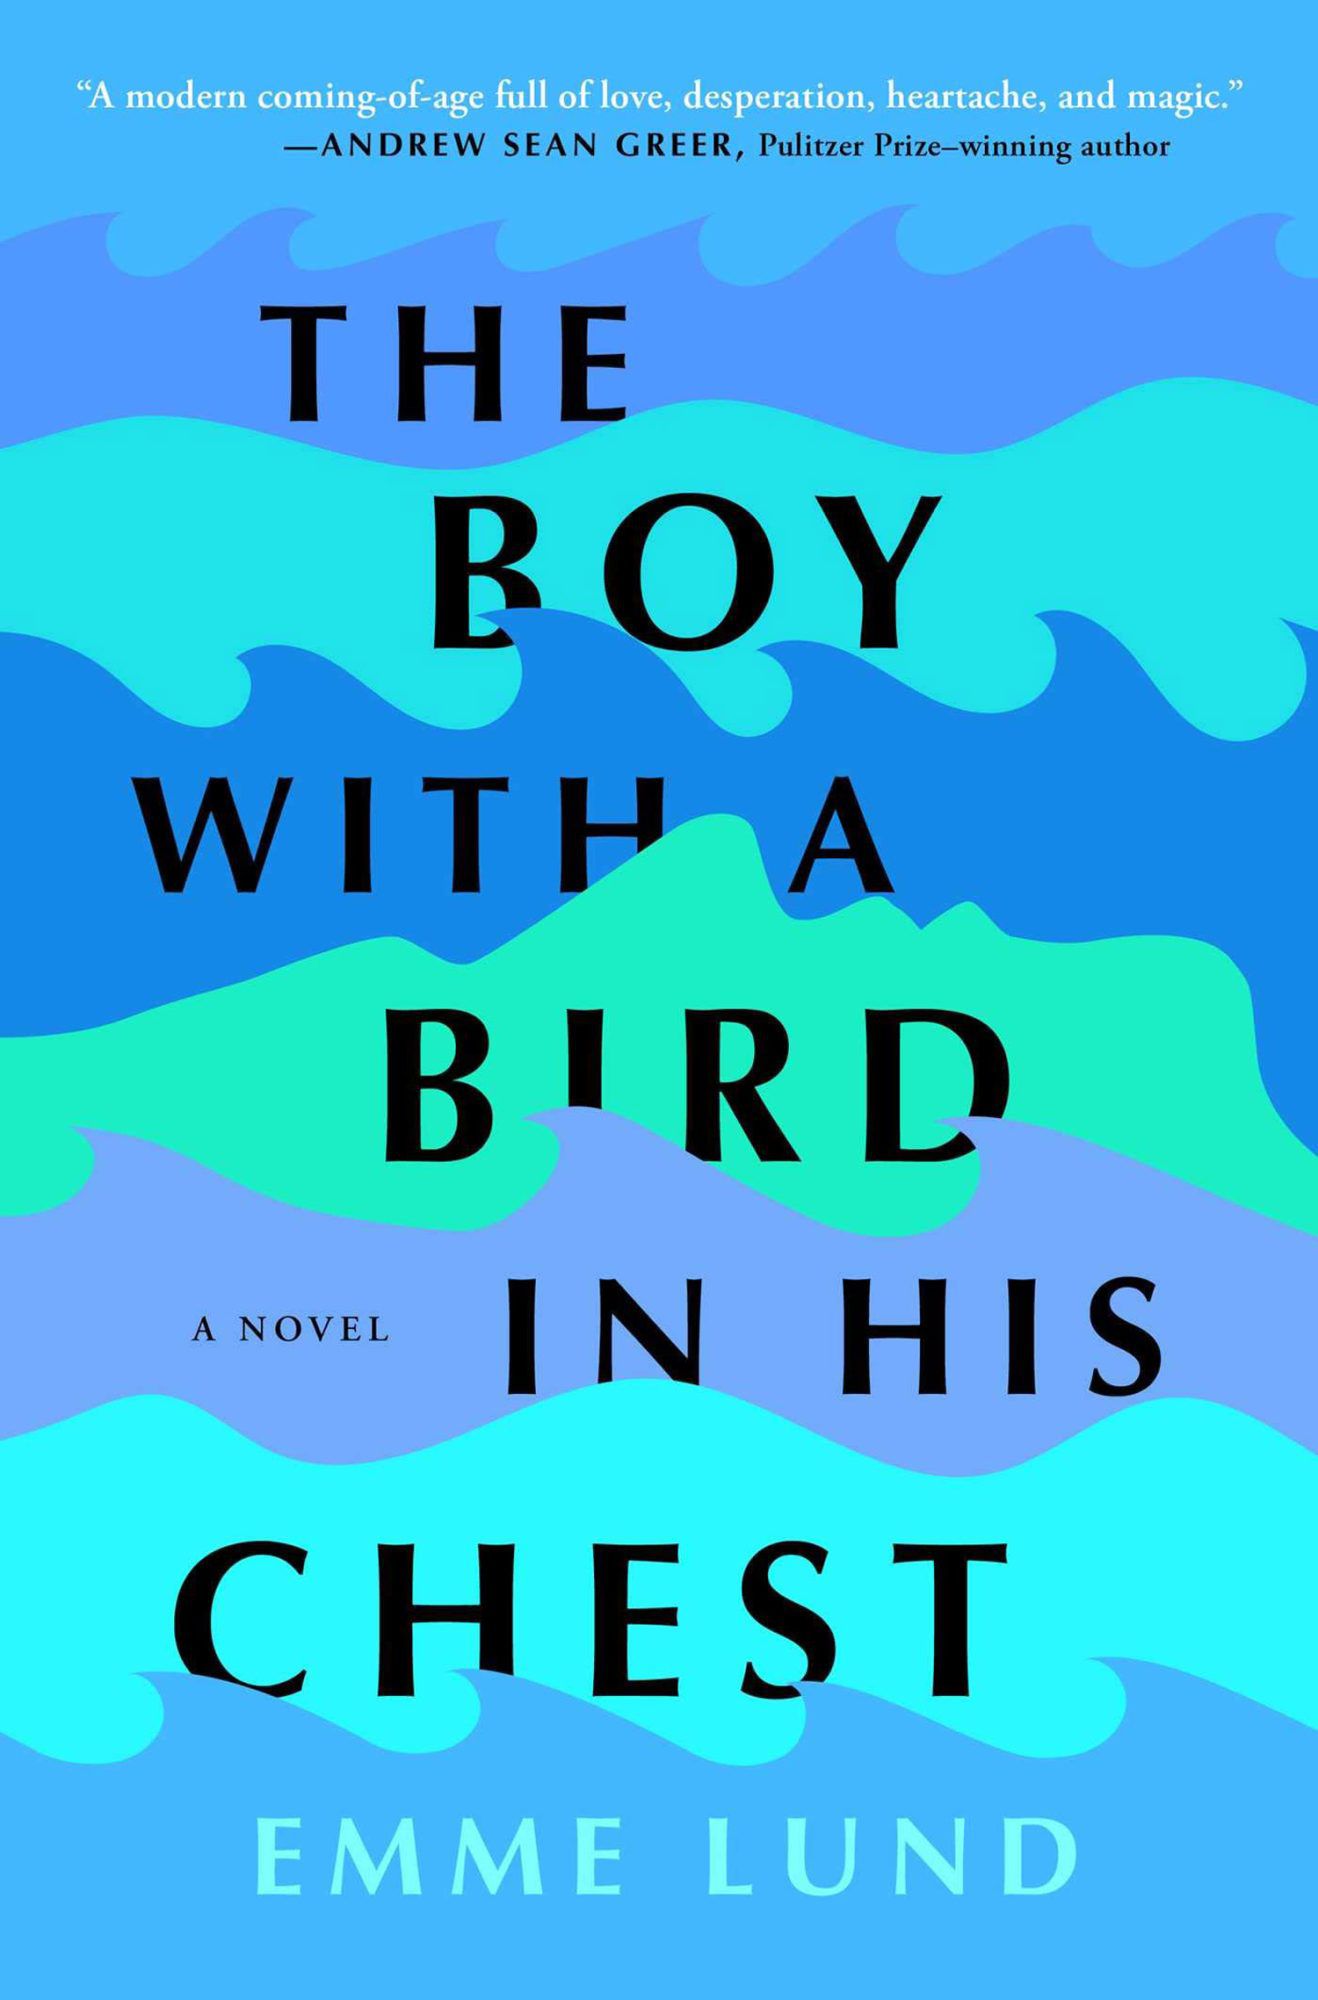 The Boy with a Bird in His Chest: A Novel by Emme Lund